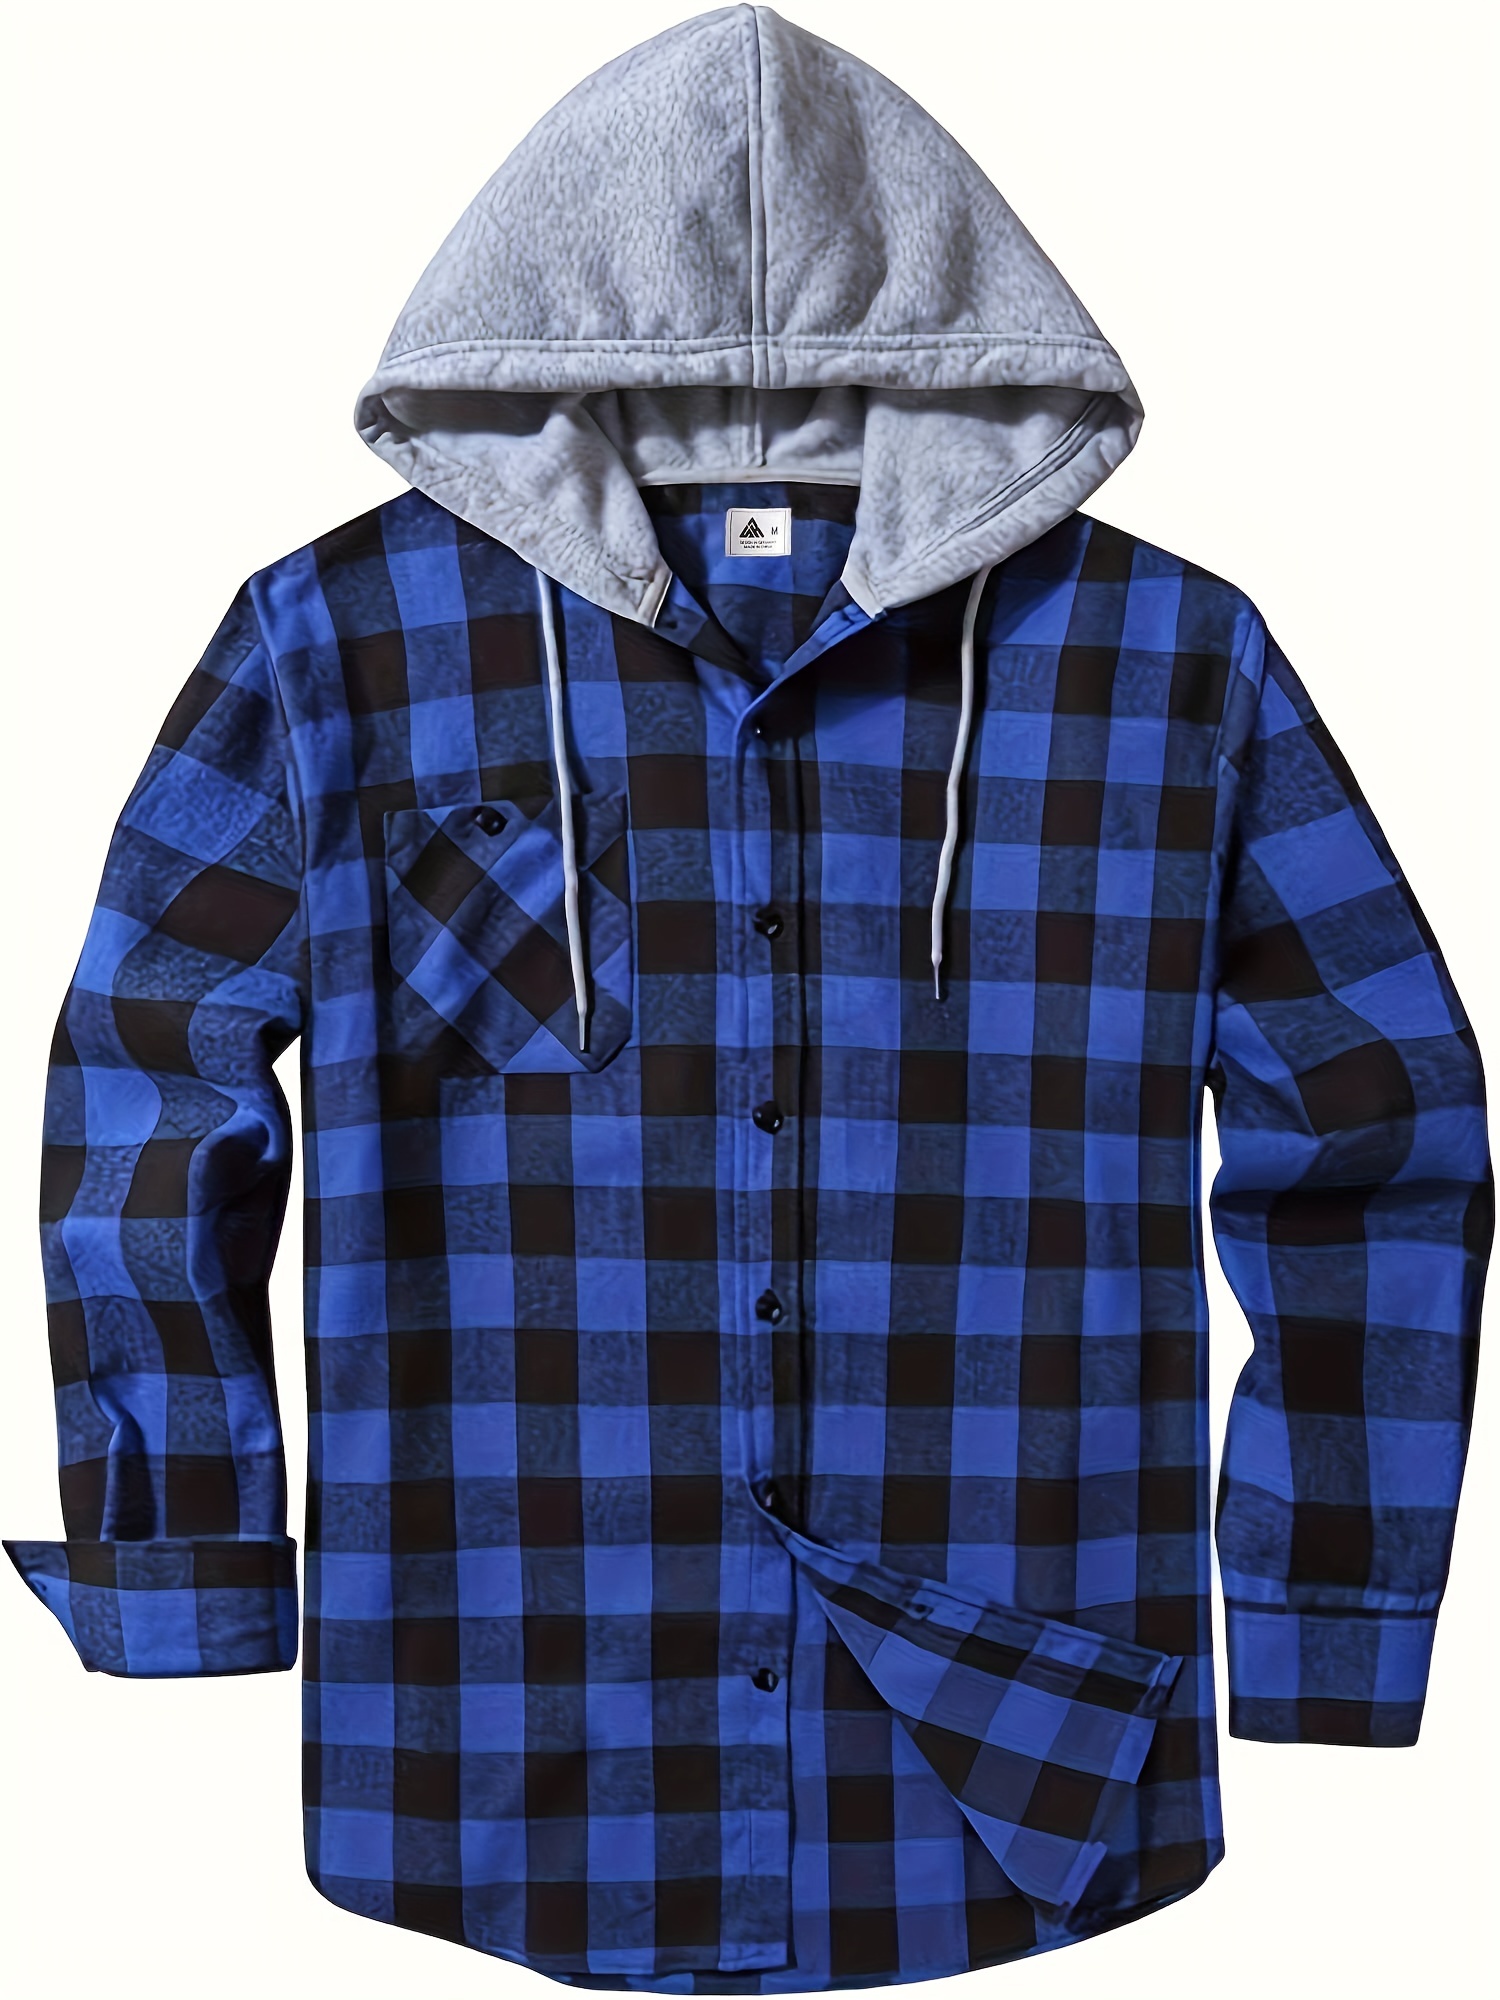 Plaid Print Casual Hooded Button Up Long Sleeve Shirt With Chest Pocket,  Men's Clothes For Spring Autumn, Tops For Men